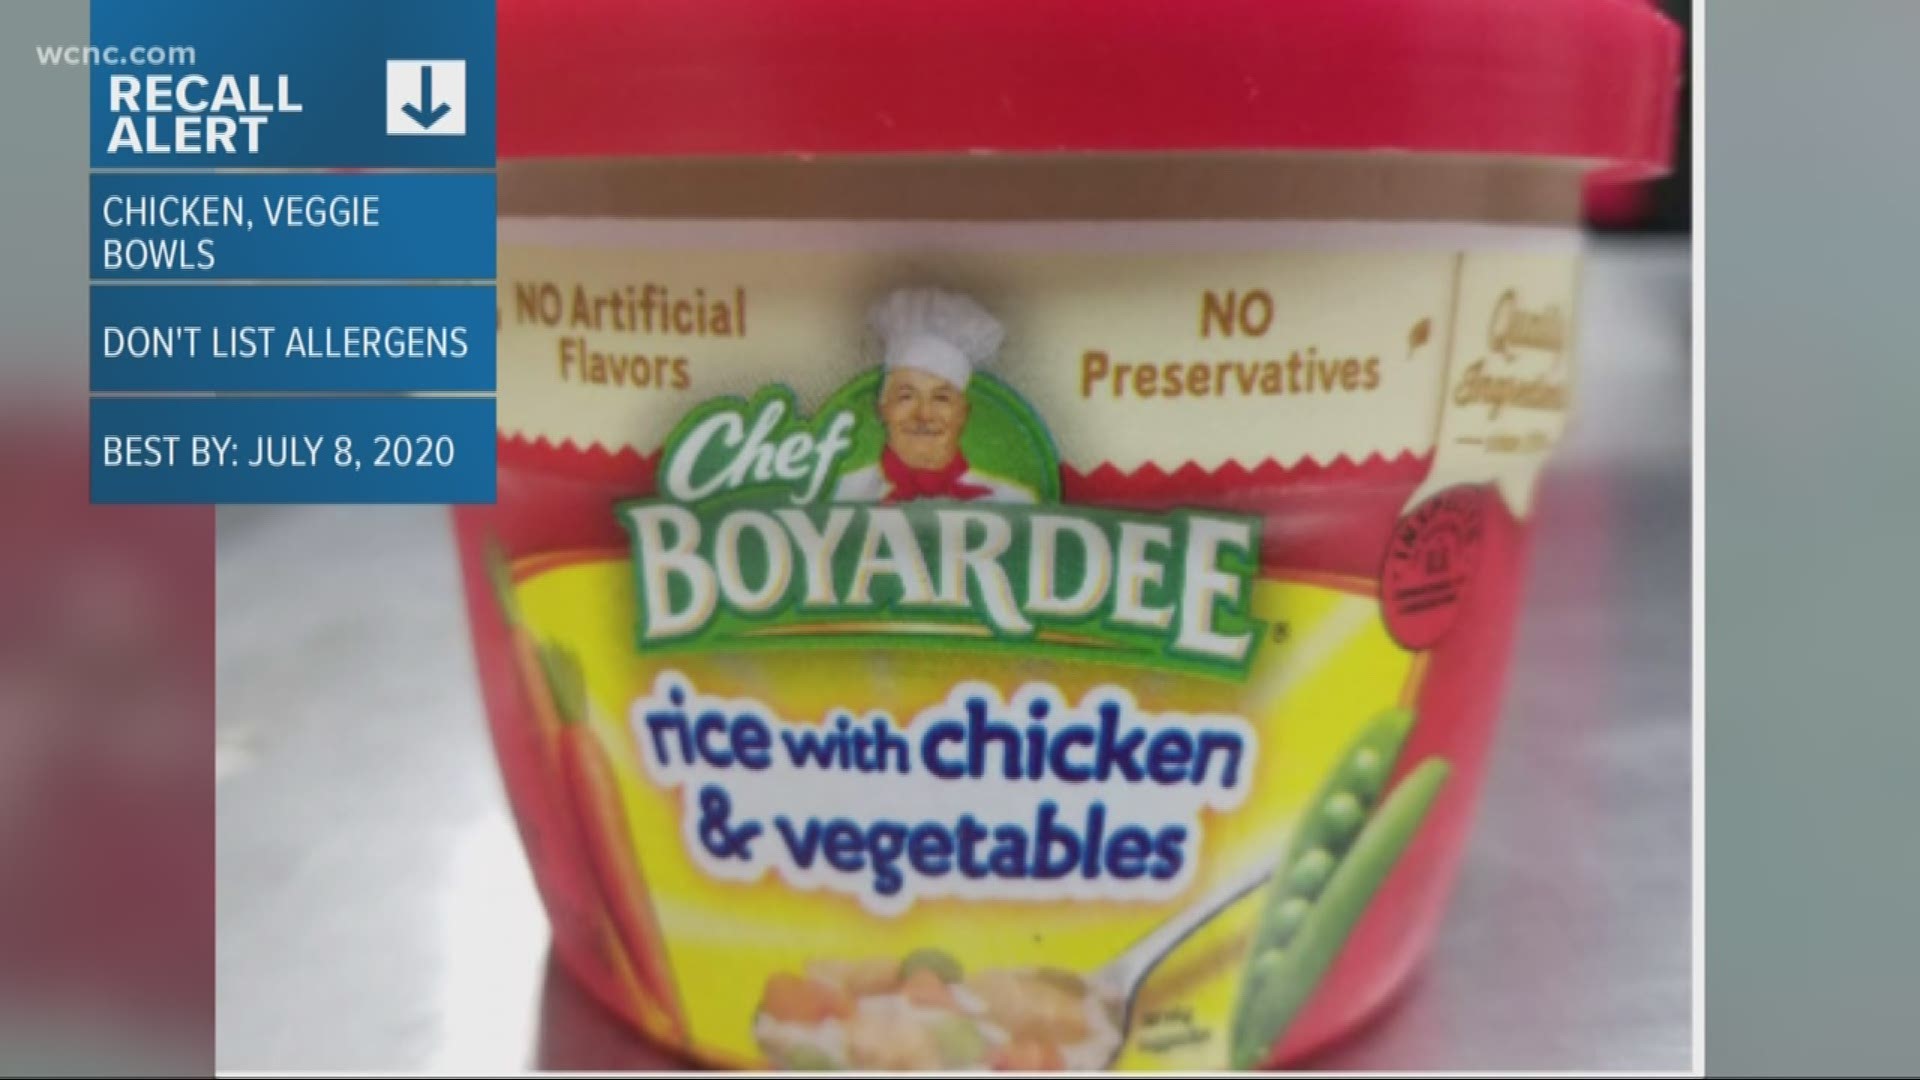 More than 2,000 pounds of Chef Boyardee rice with chicken & vegetables bowls are being recalled because they were mislabeled and do not list a potential allergen, according to ConAgra Foods.